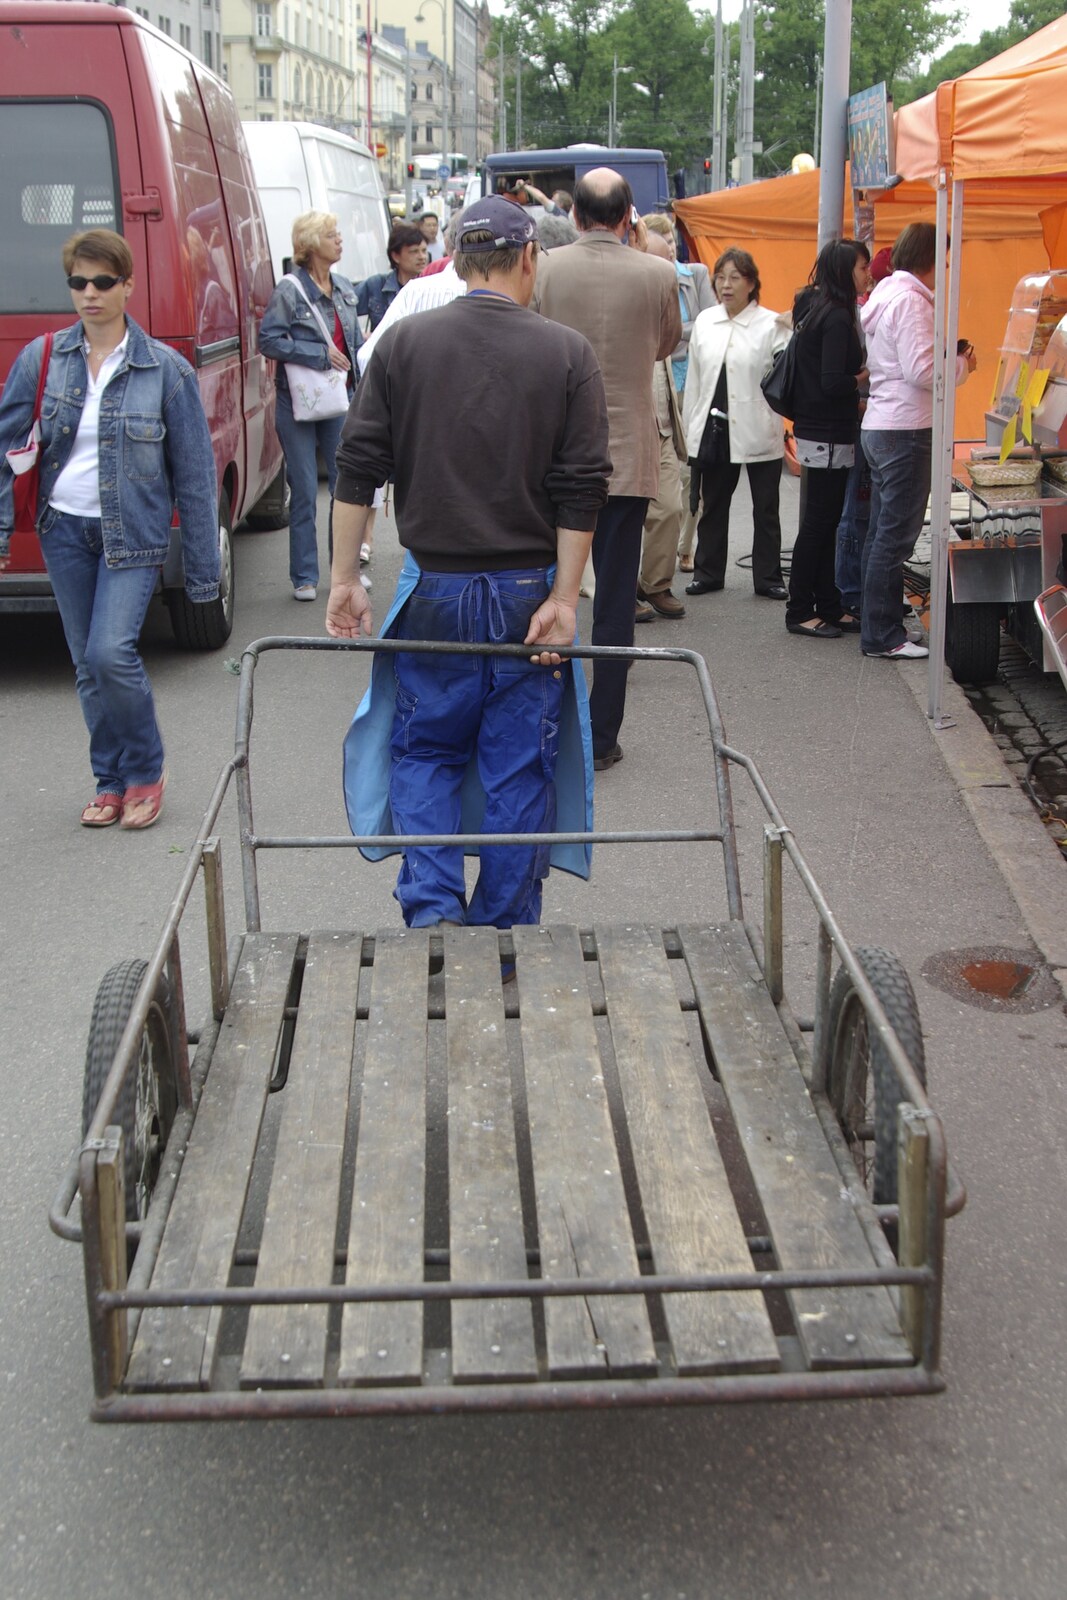 Genesis in Concert, and Suomenlinna, Helsinki, Finland - 11th June 2007: A trailer is hauled around the market